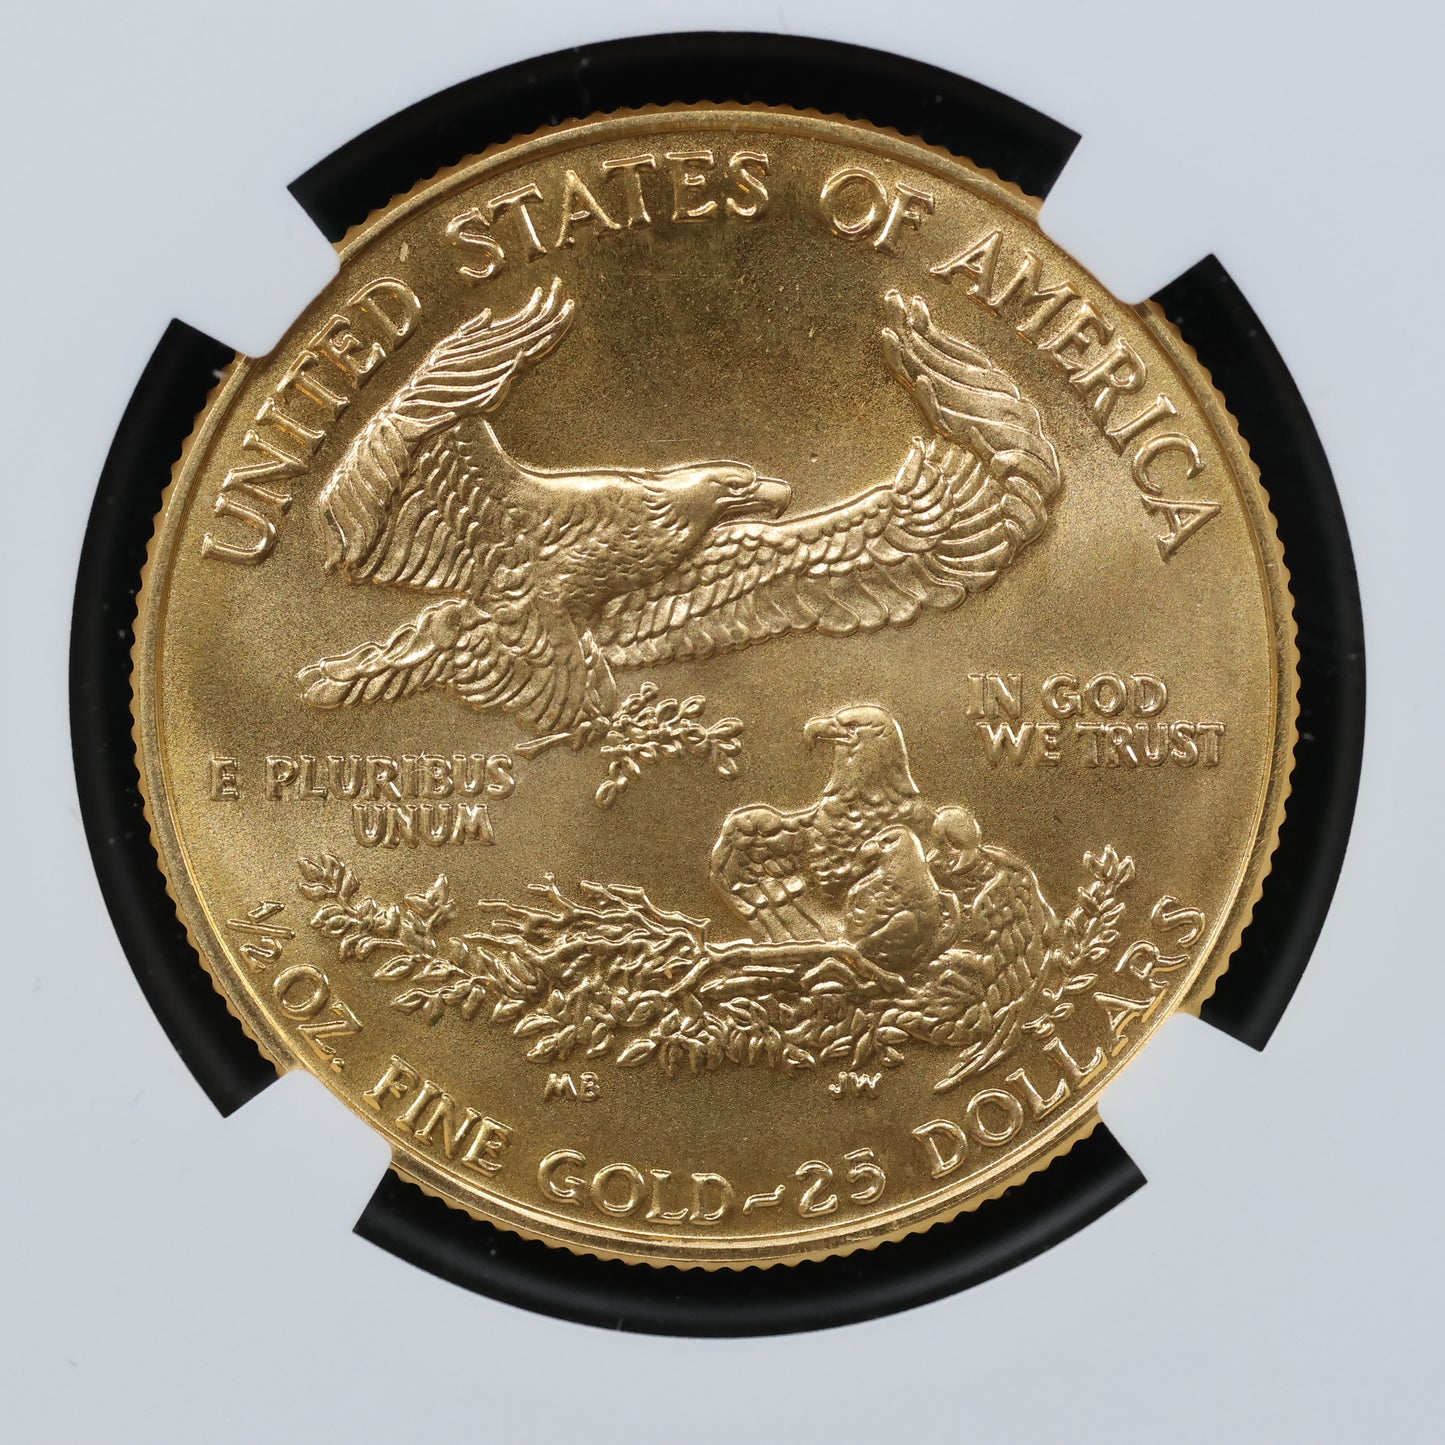 1989 1/2 oz Gold American Eagle 25$ Bullion Gold Coin - NGC MS 69